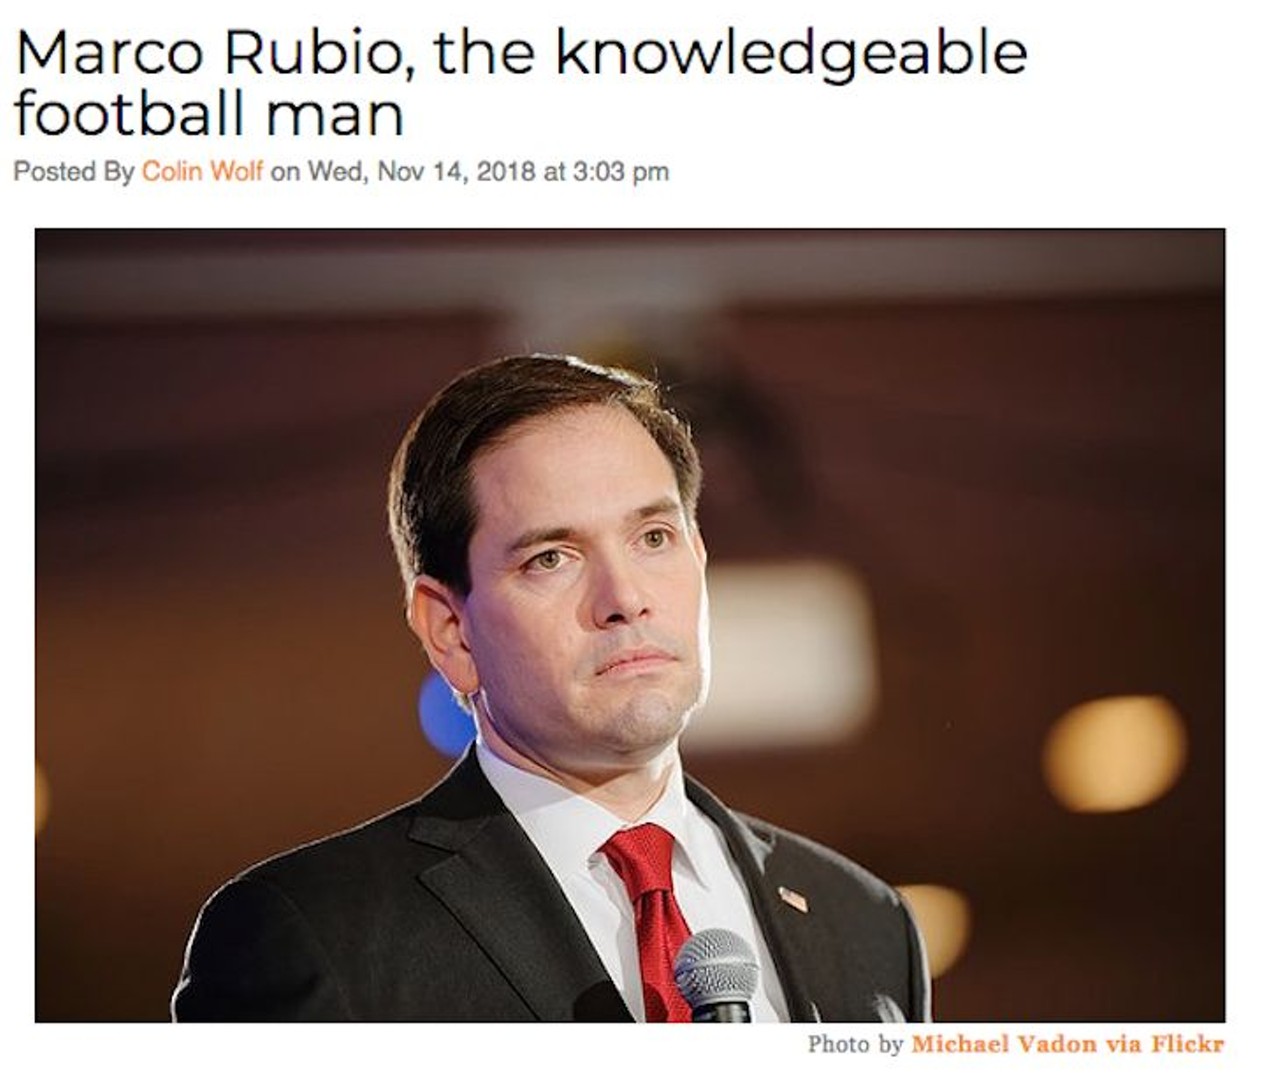 Florida Senator Marco Rubio, a guy who once casually beaned a kid in the face with a football, has recently been peddling a string of unfounded conspiracy theories regarding the recent Florida recounts. Now it seems these crackpot theories have now morphed into incredibly horrible football metaphors. Read more here.